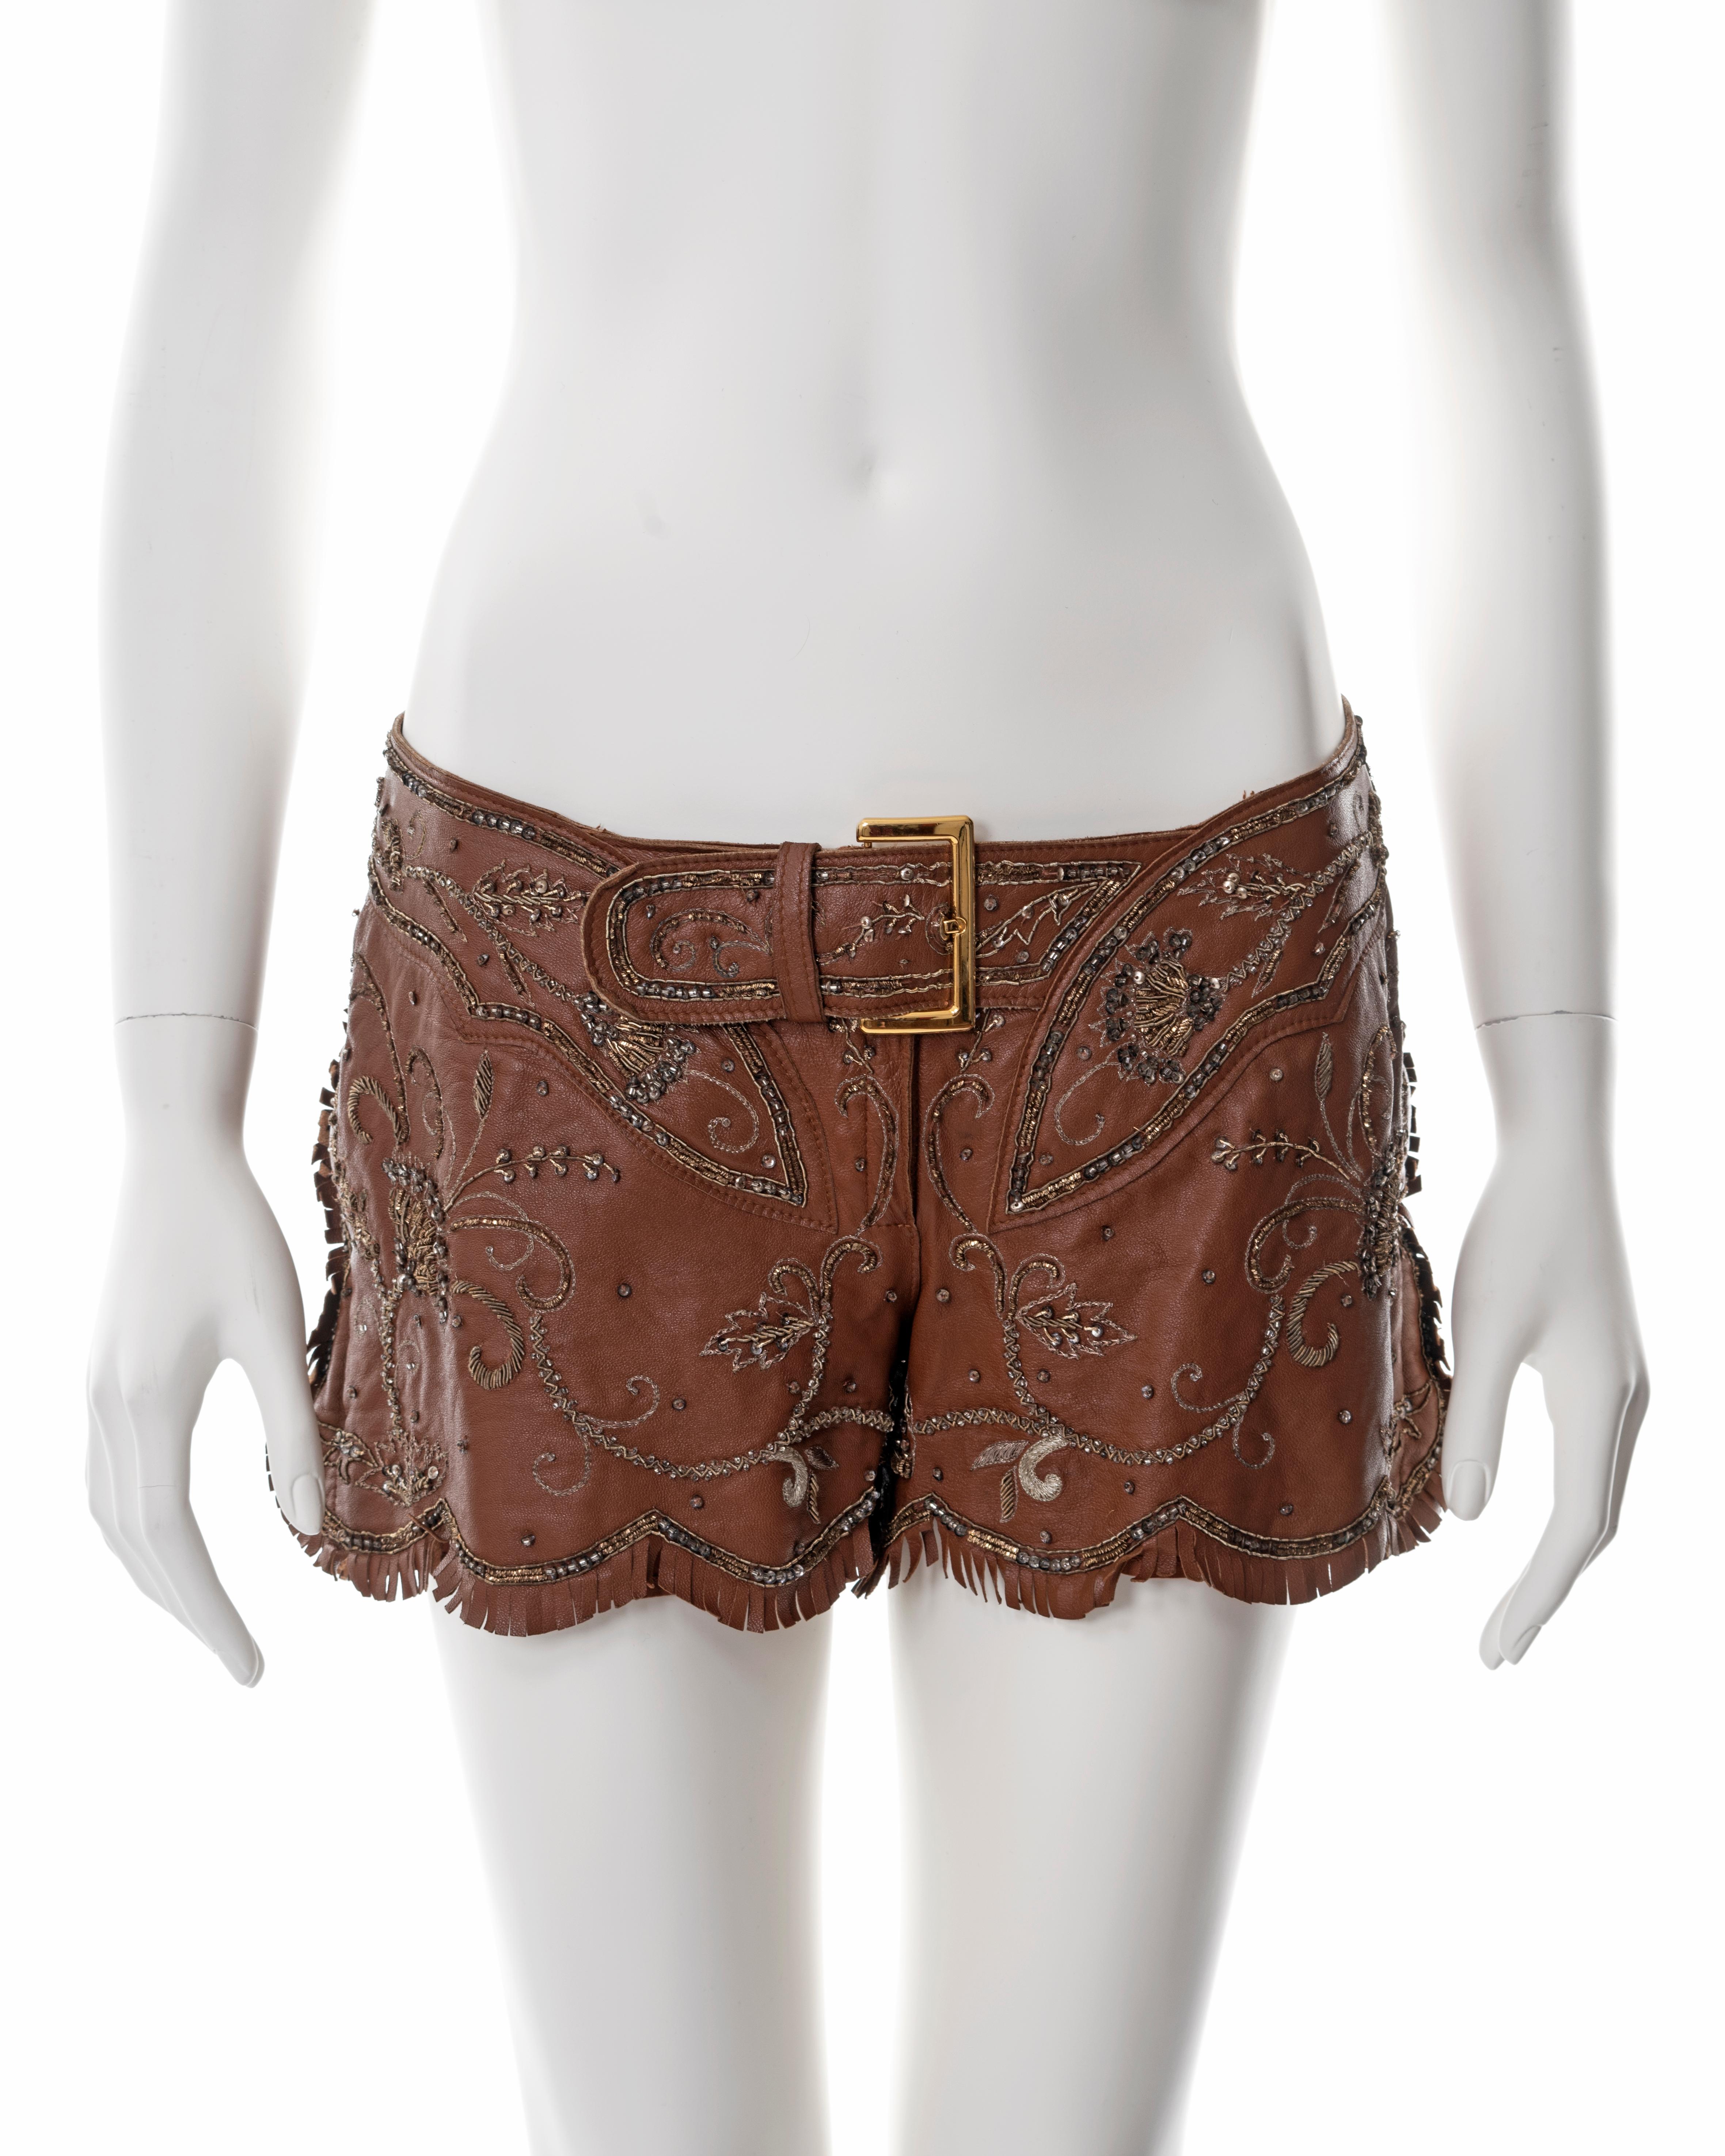 Women's Dolce & Gabbana embroidered brown leather hot pants, ss 2001